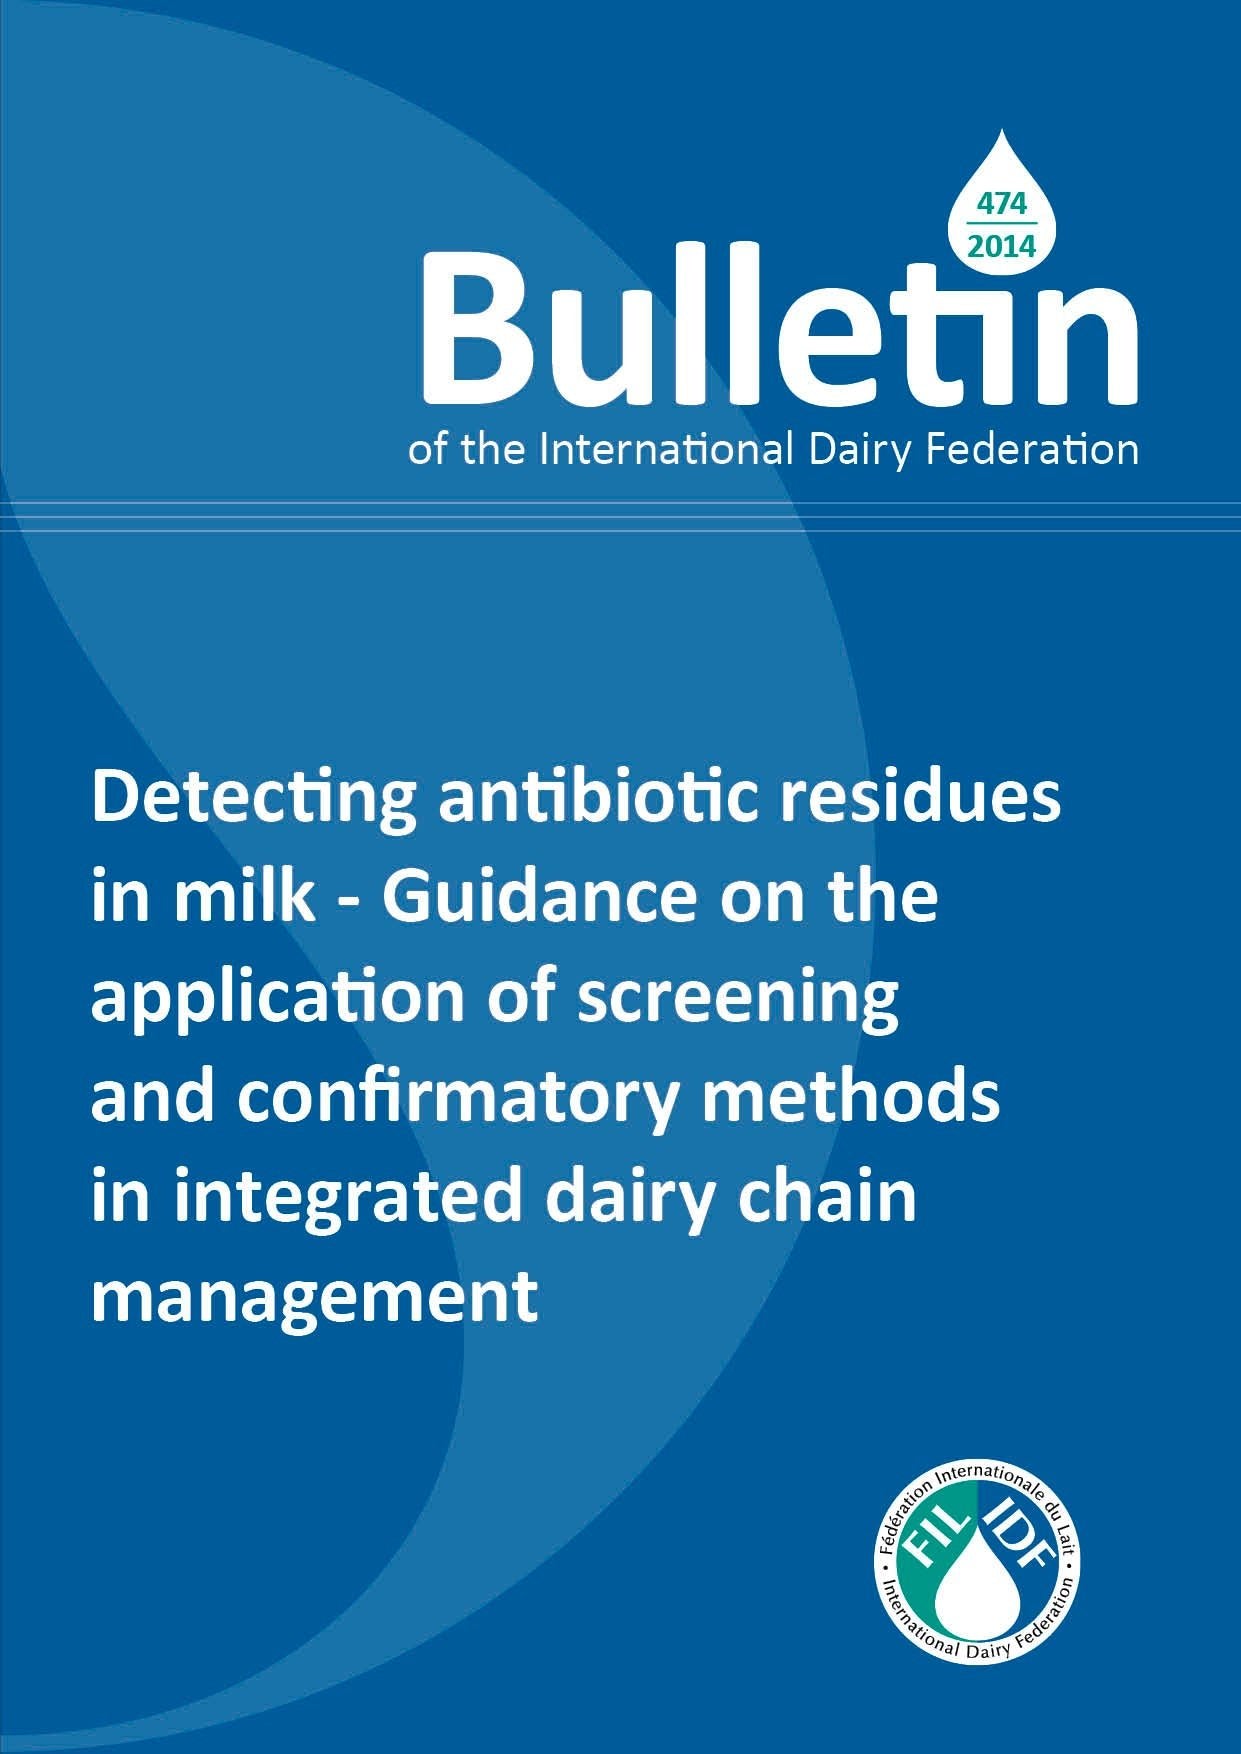 Bulletin of the IDF N° 474/ 2014: Detecting antibiotic residues in milk - Guidance on the application of screening and confirmatory methods in integrated dairy chain management - FIL-IDF